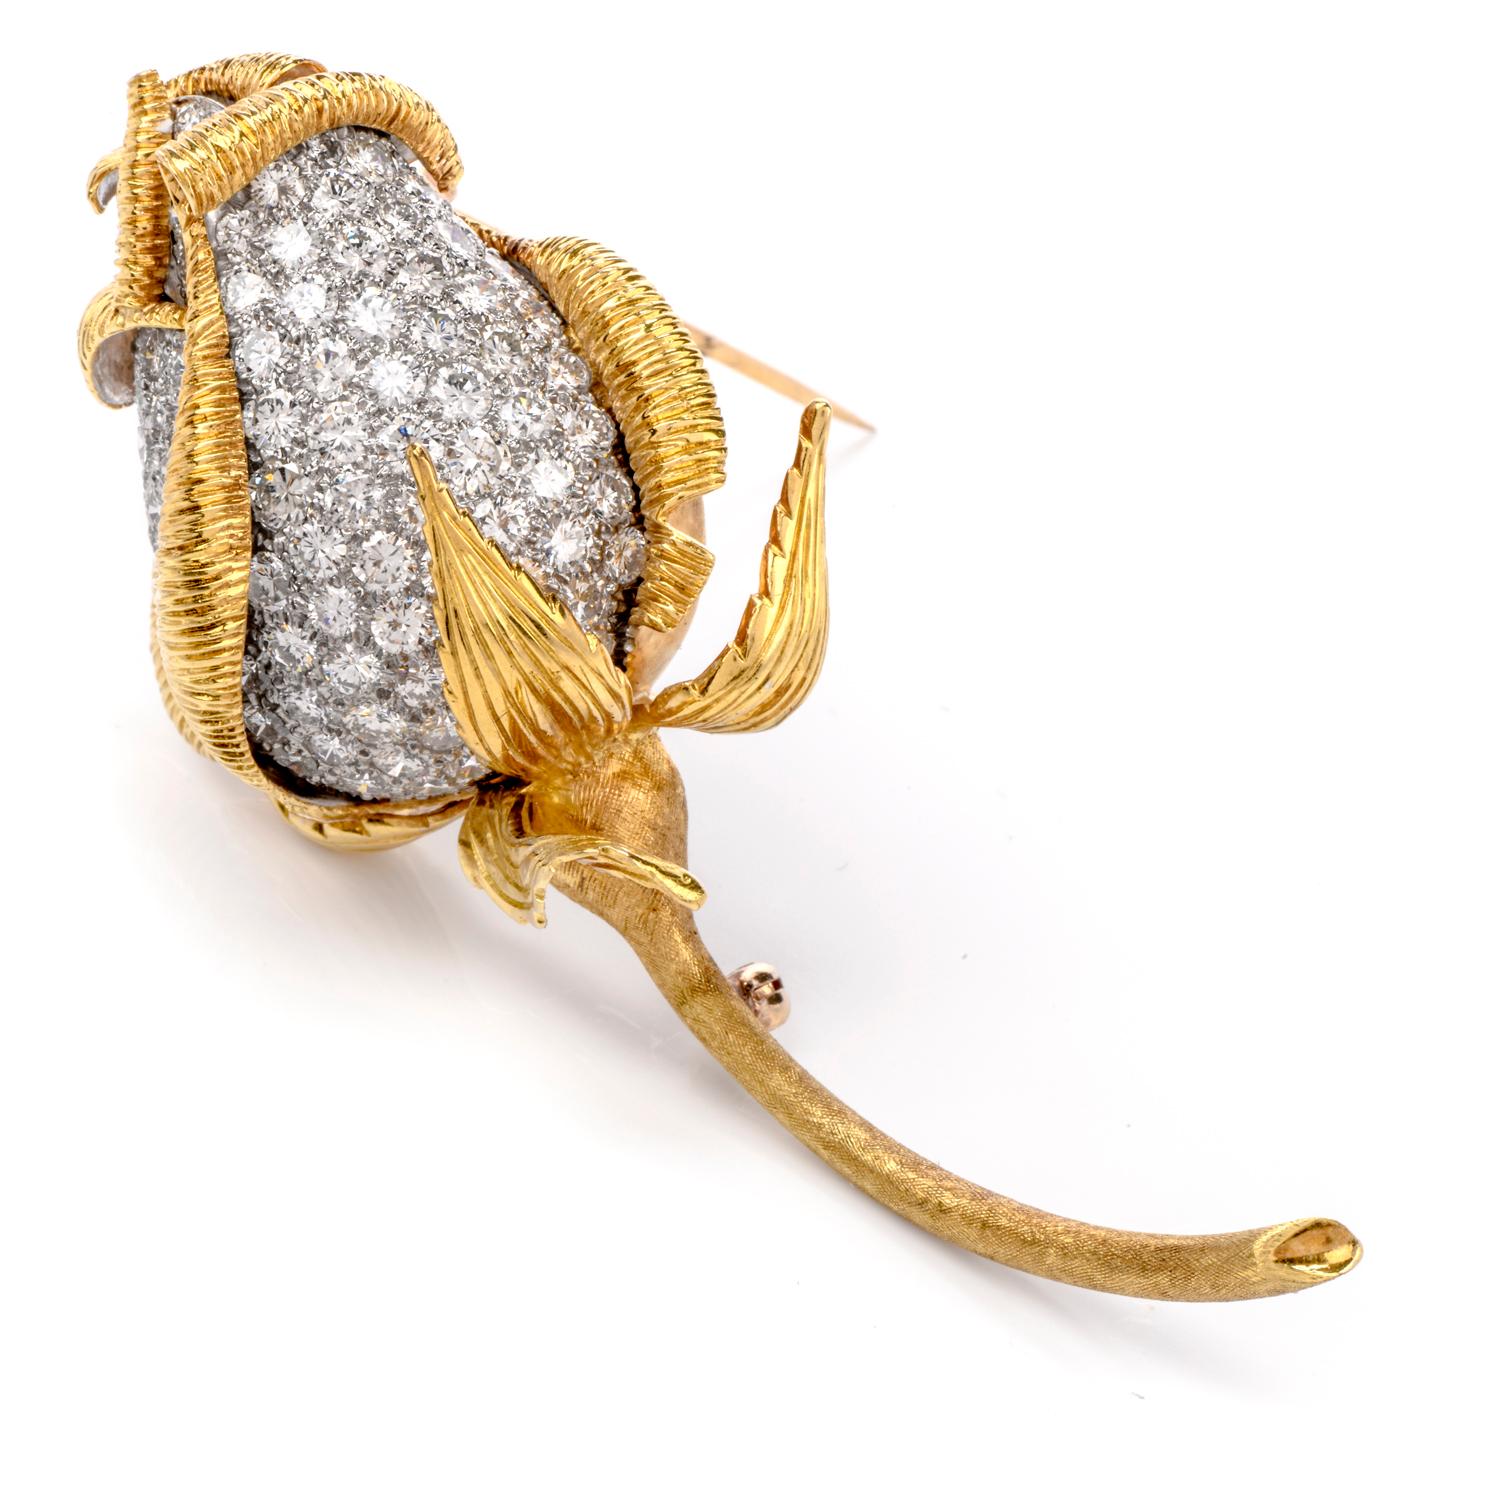 This sensational, Kutchinsky intricate brooch was handcrafted in 18K yellow gold and fashioned into a Rose Bud motif.

Yellow gold scalloped and carved leaves wrap the closed flower bud which consists of a contrasting color offered by the icy white